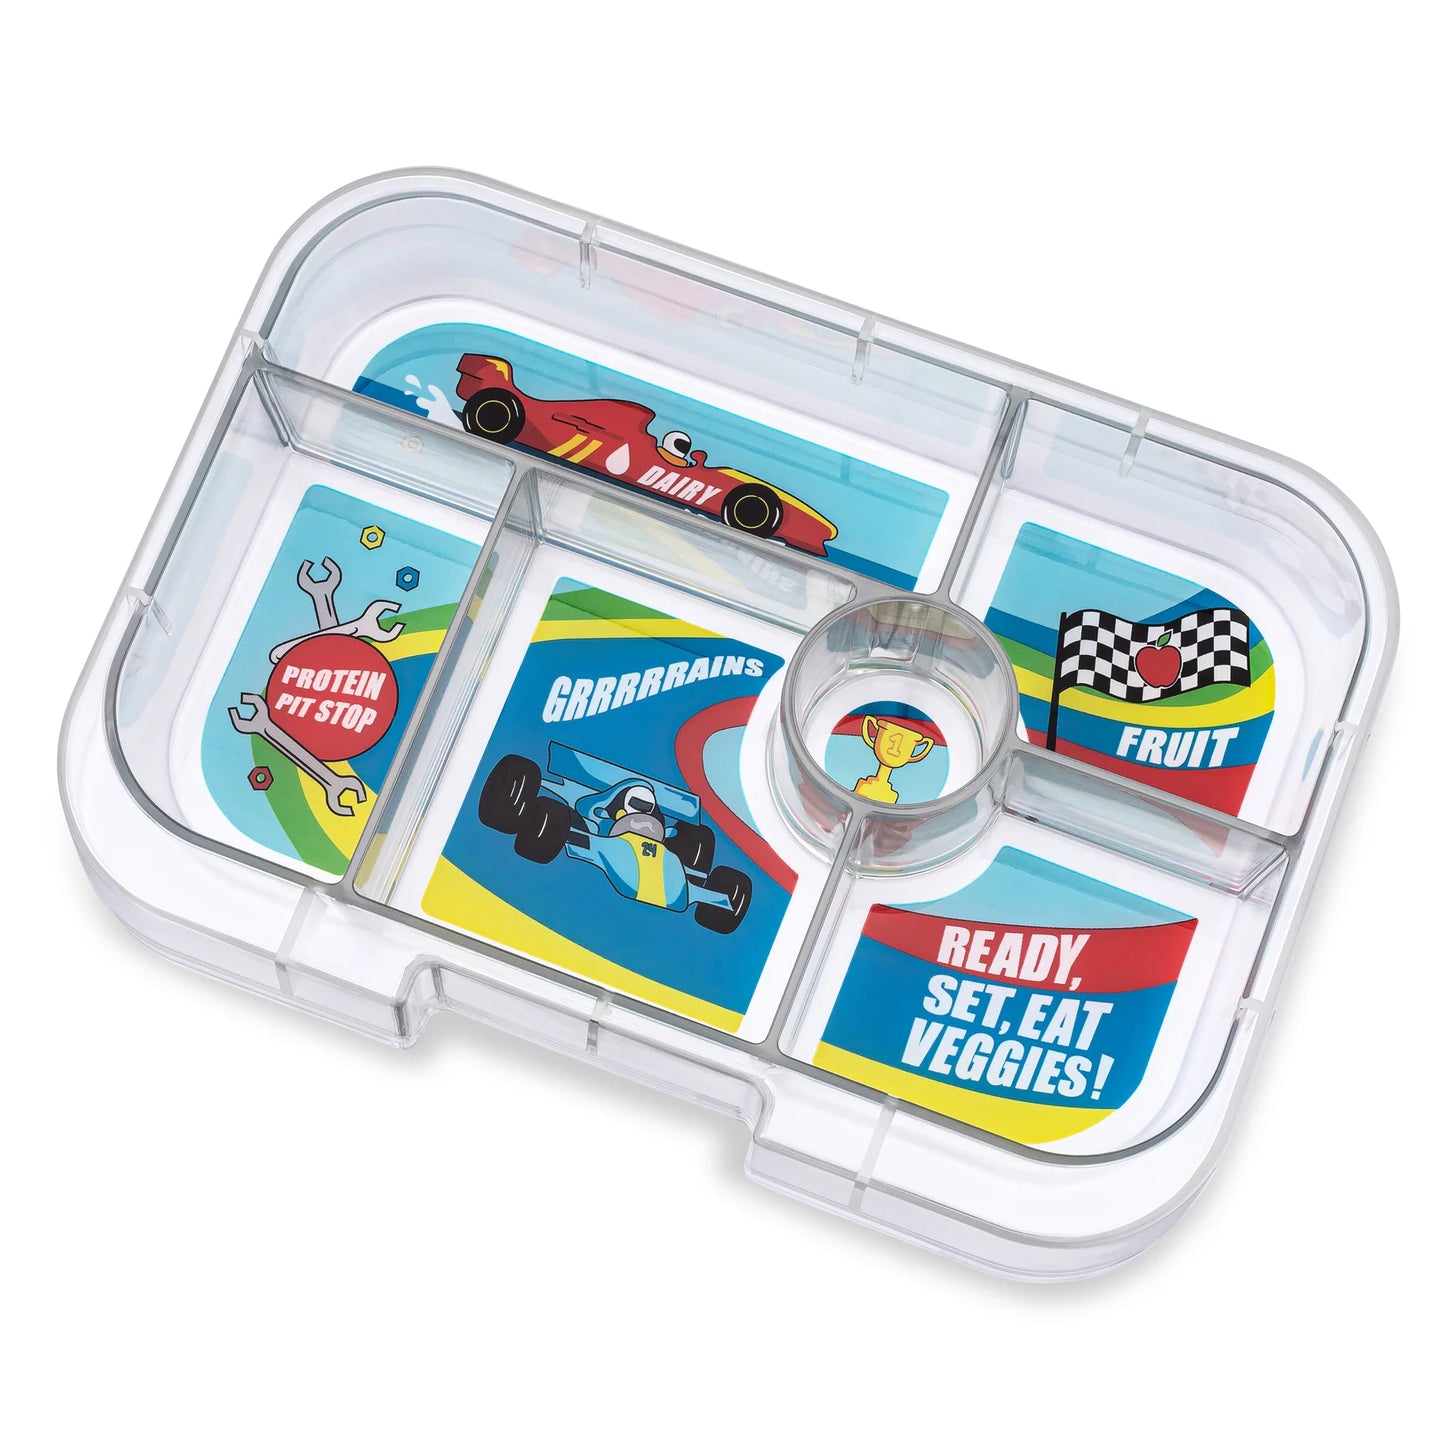 Yumbox Original Lunch Box 6 sections - Surf Blue Race Cars